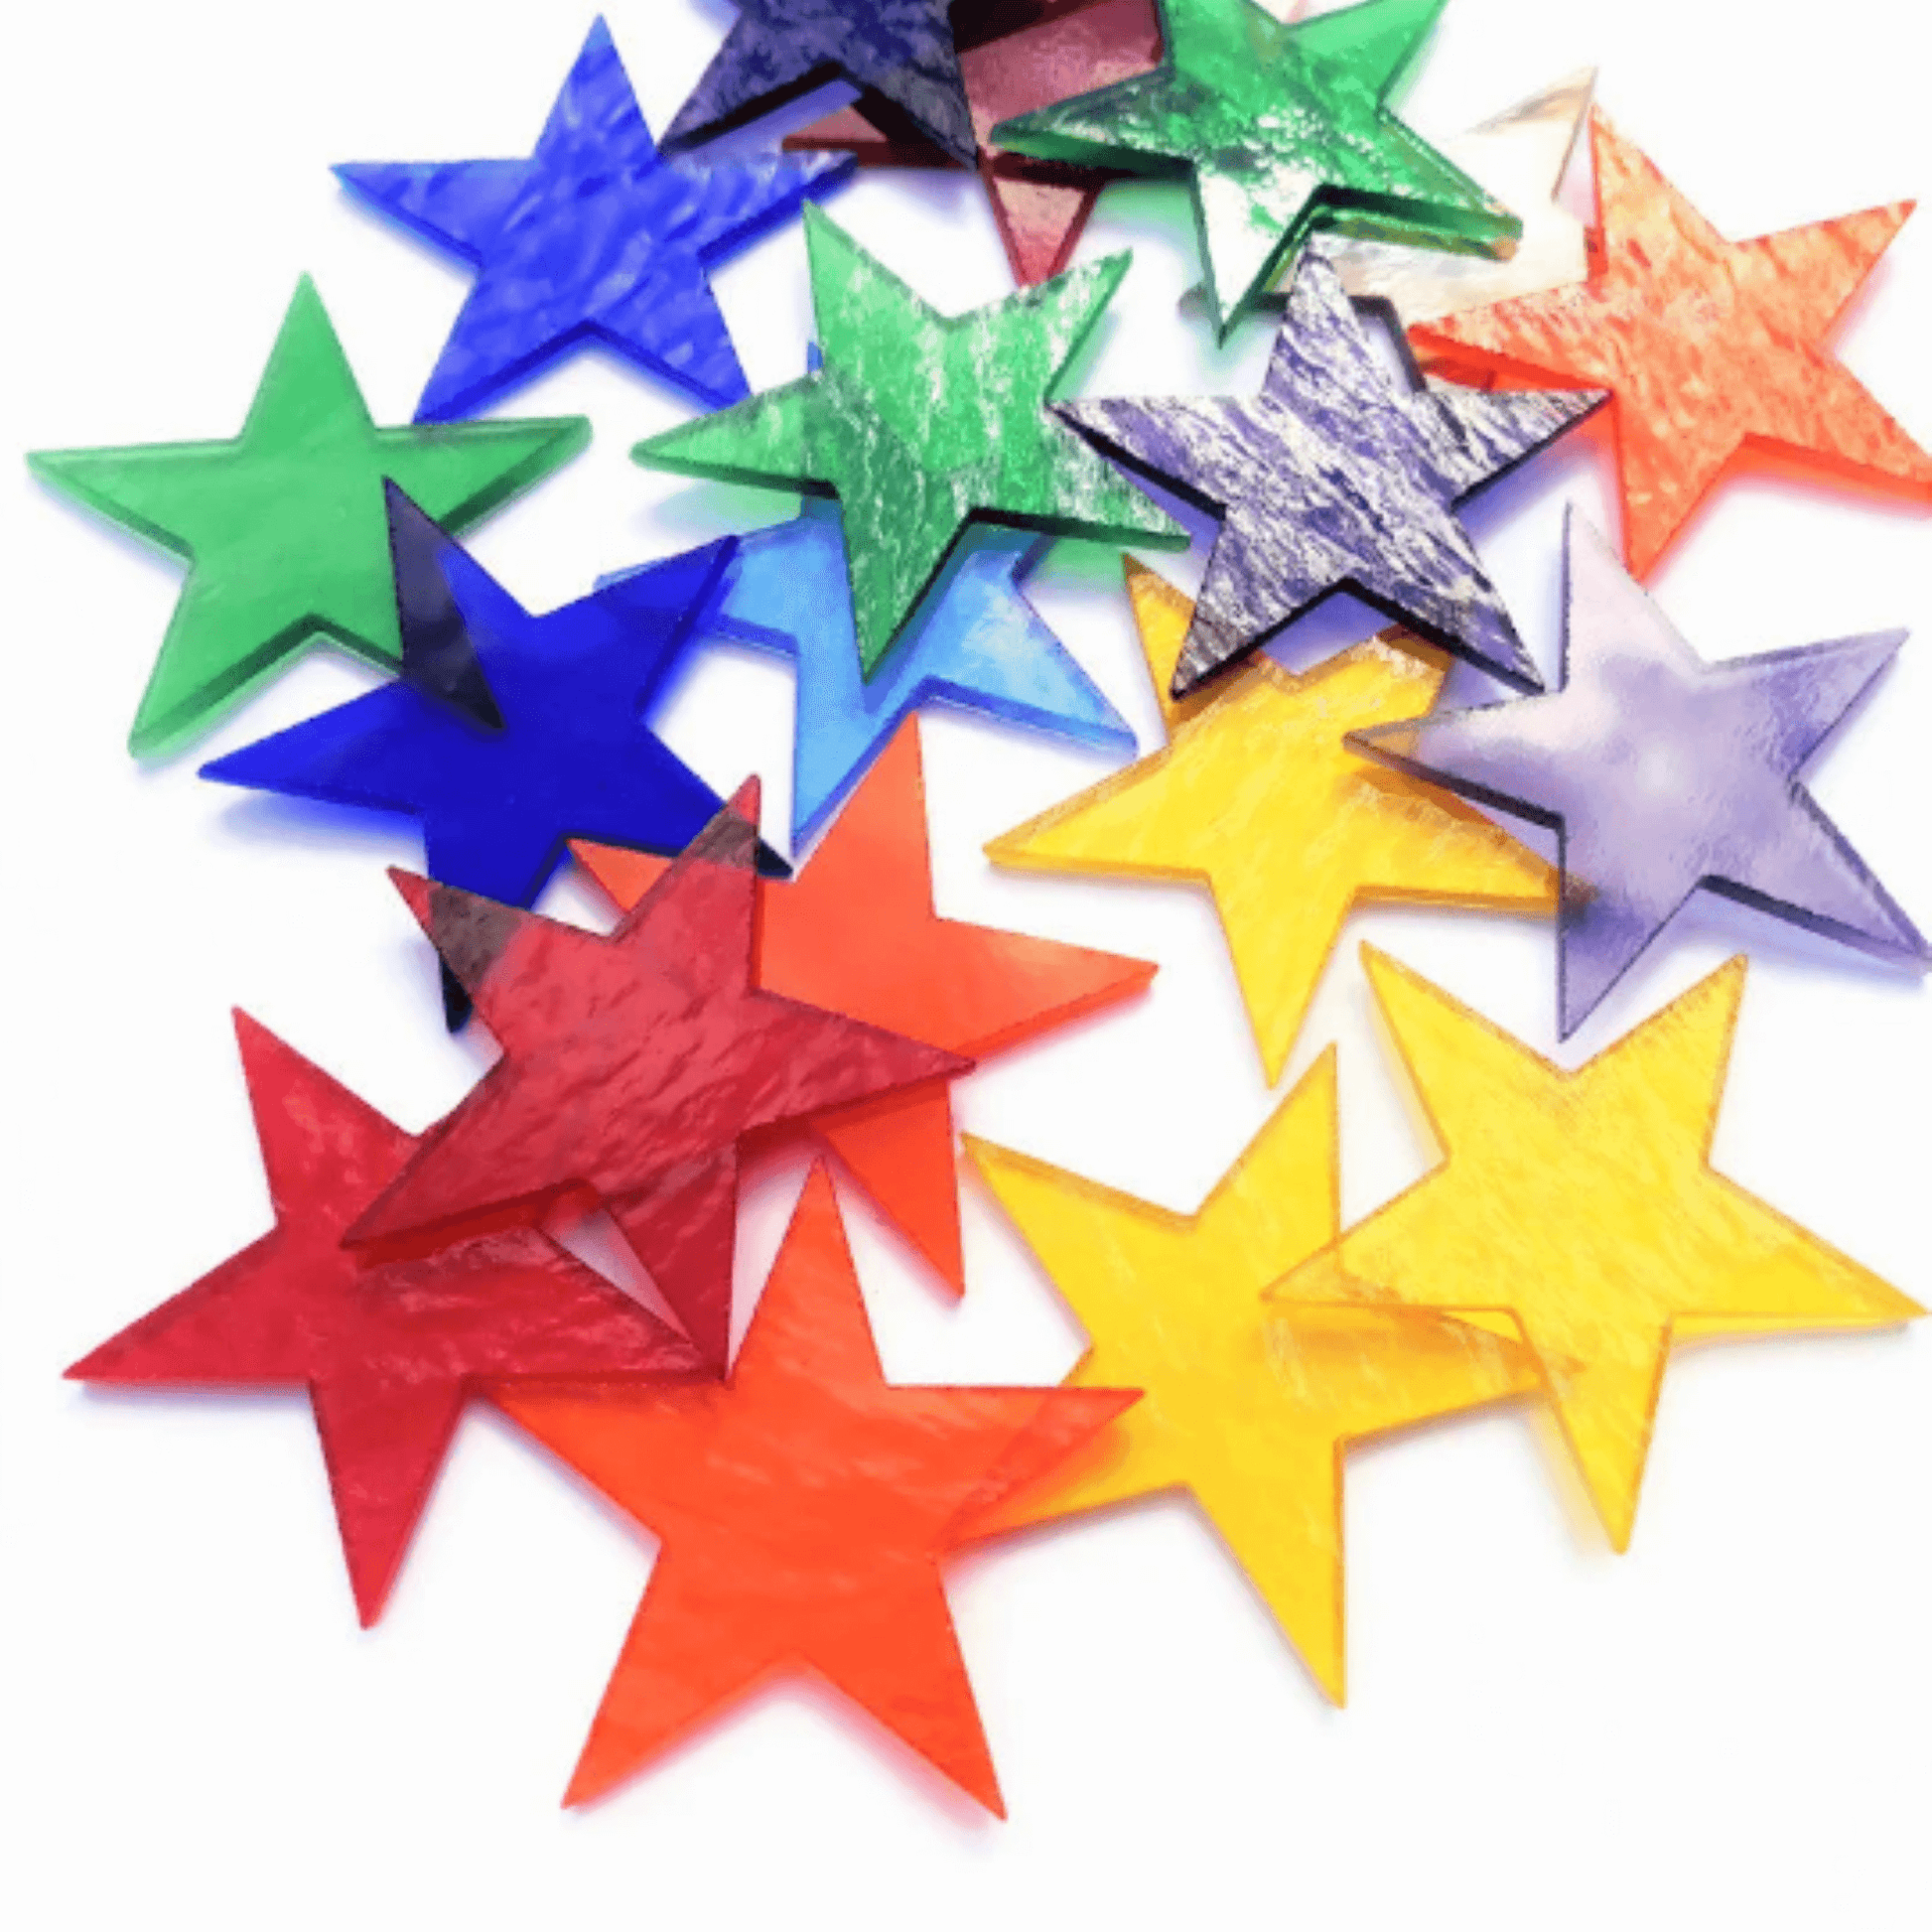 Precut Stained Glass Stars, Assorted Colors, 2 inch Glass Stars for Mosaics, Jewelry, Stained Glass